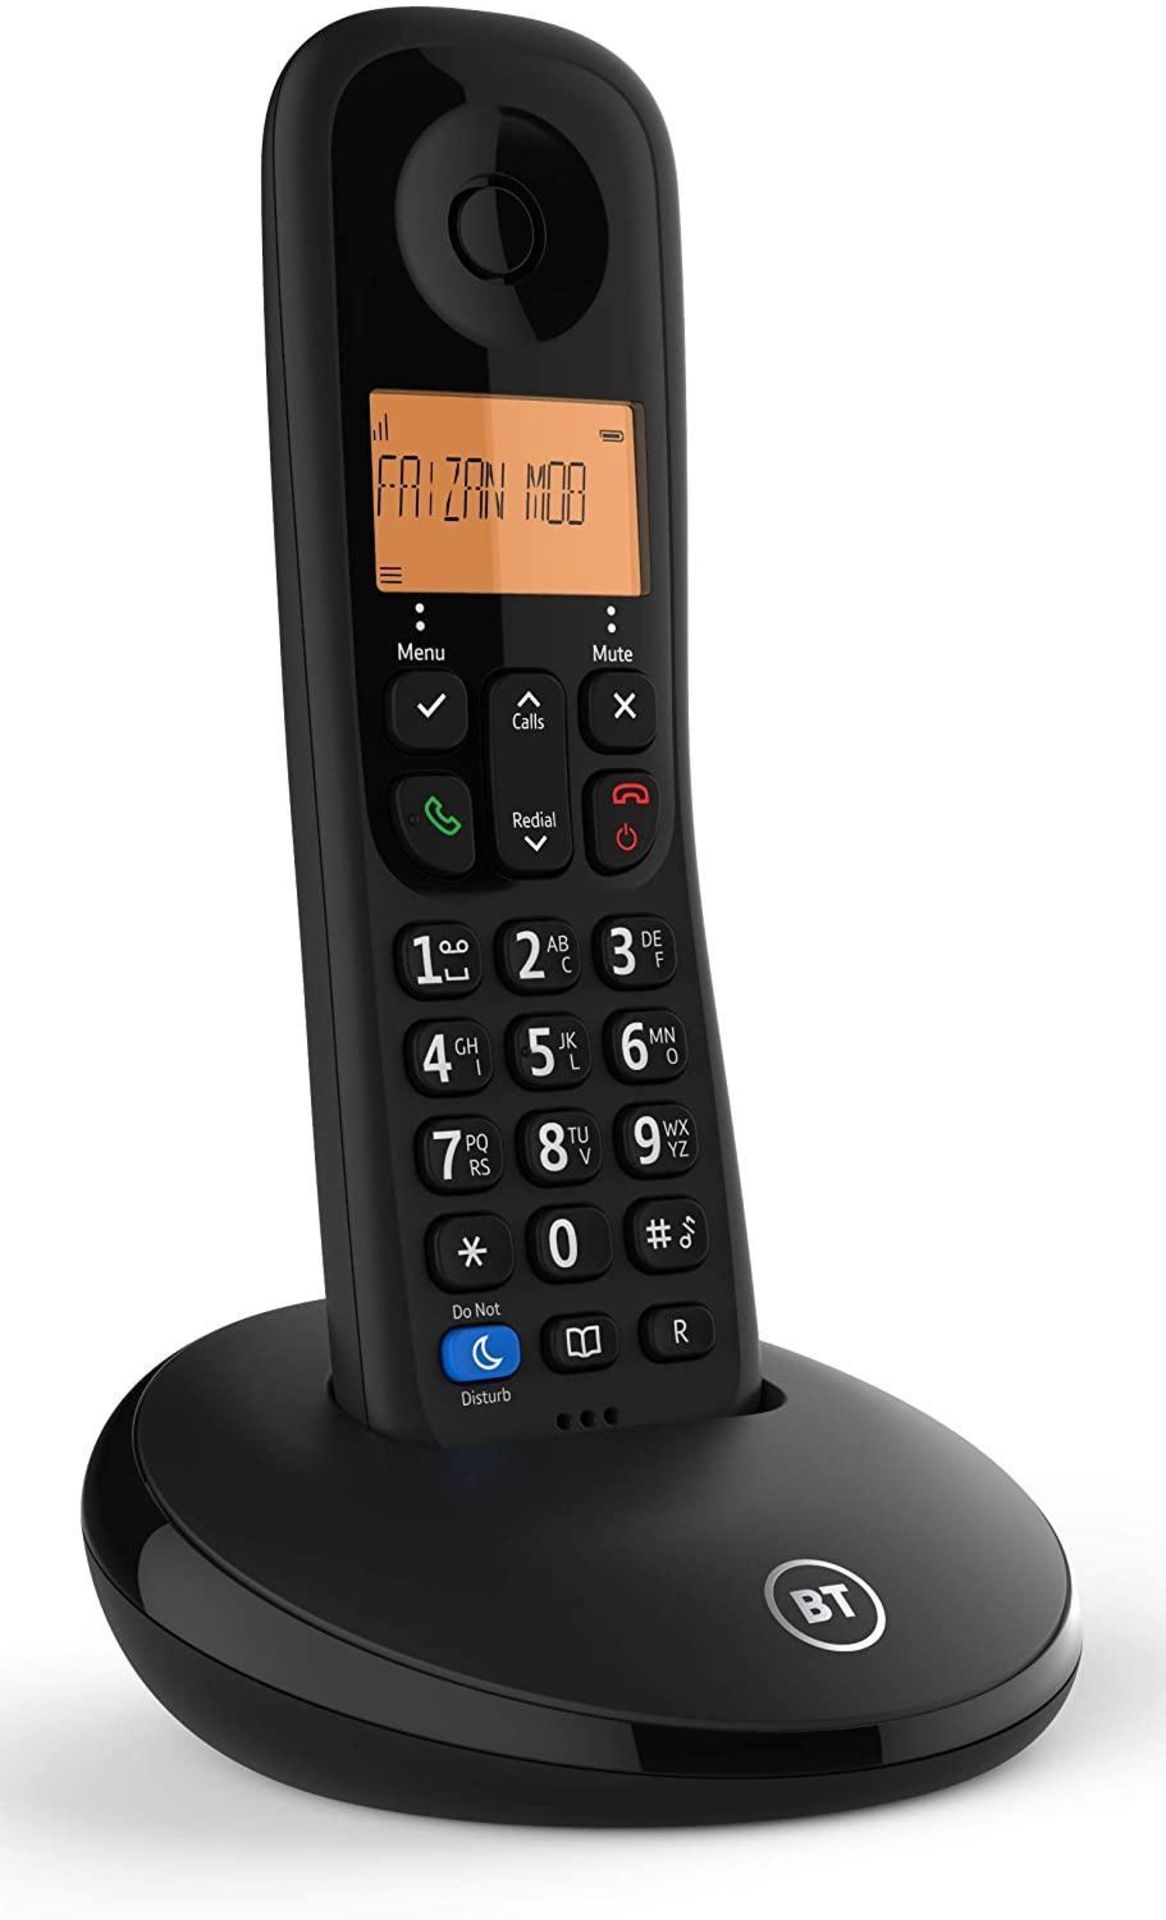 BT Everyday Cordless Home Phone with Basic Call Blocking, Single Handset Pack £19.99 RRP